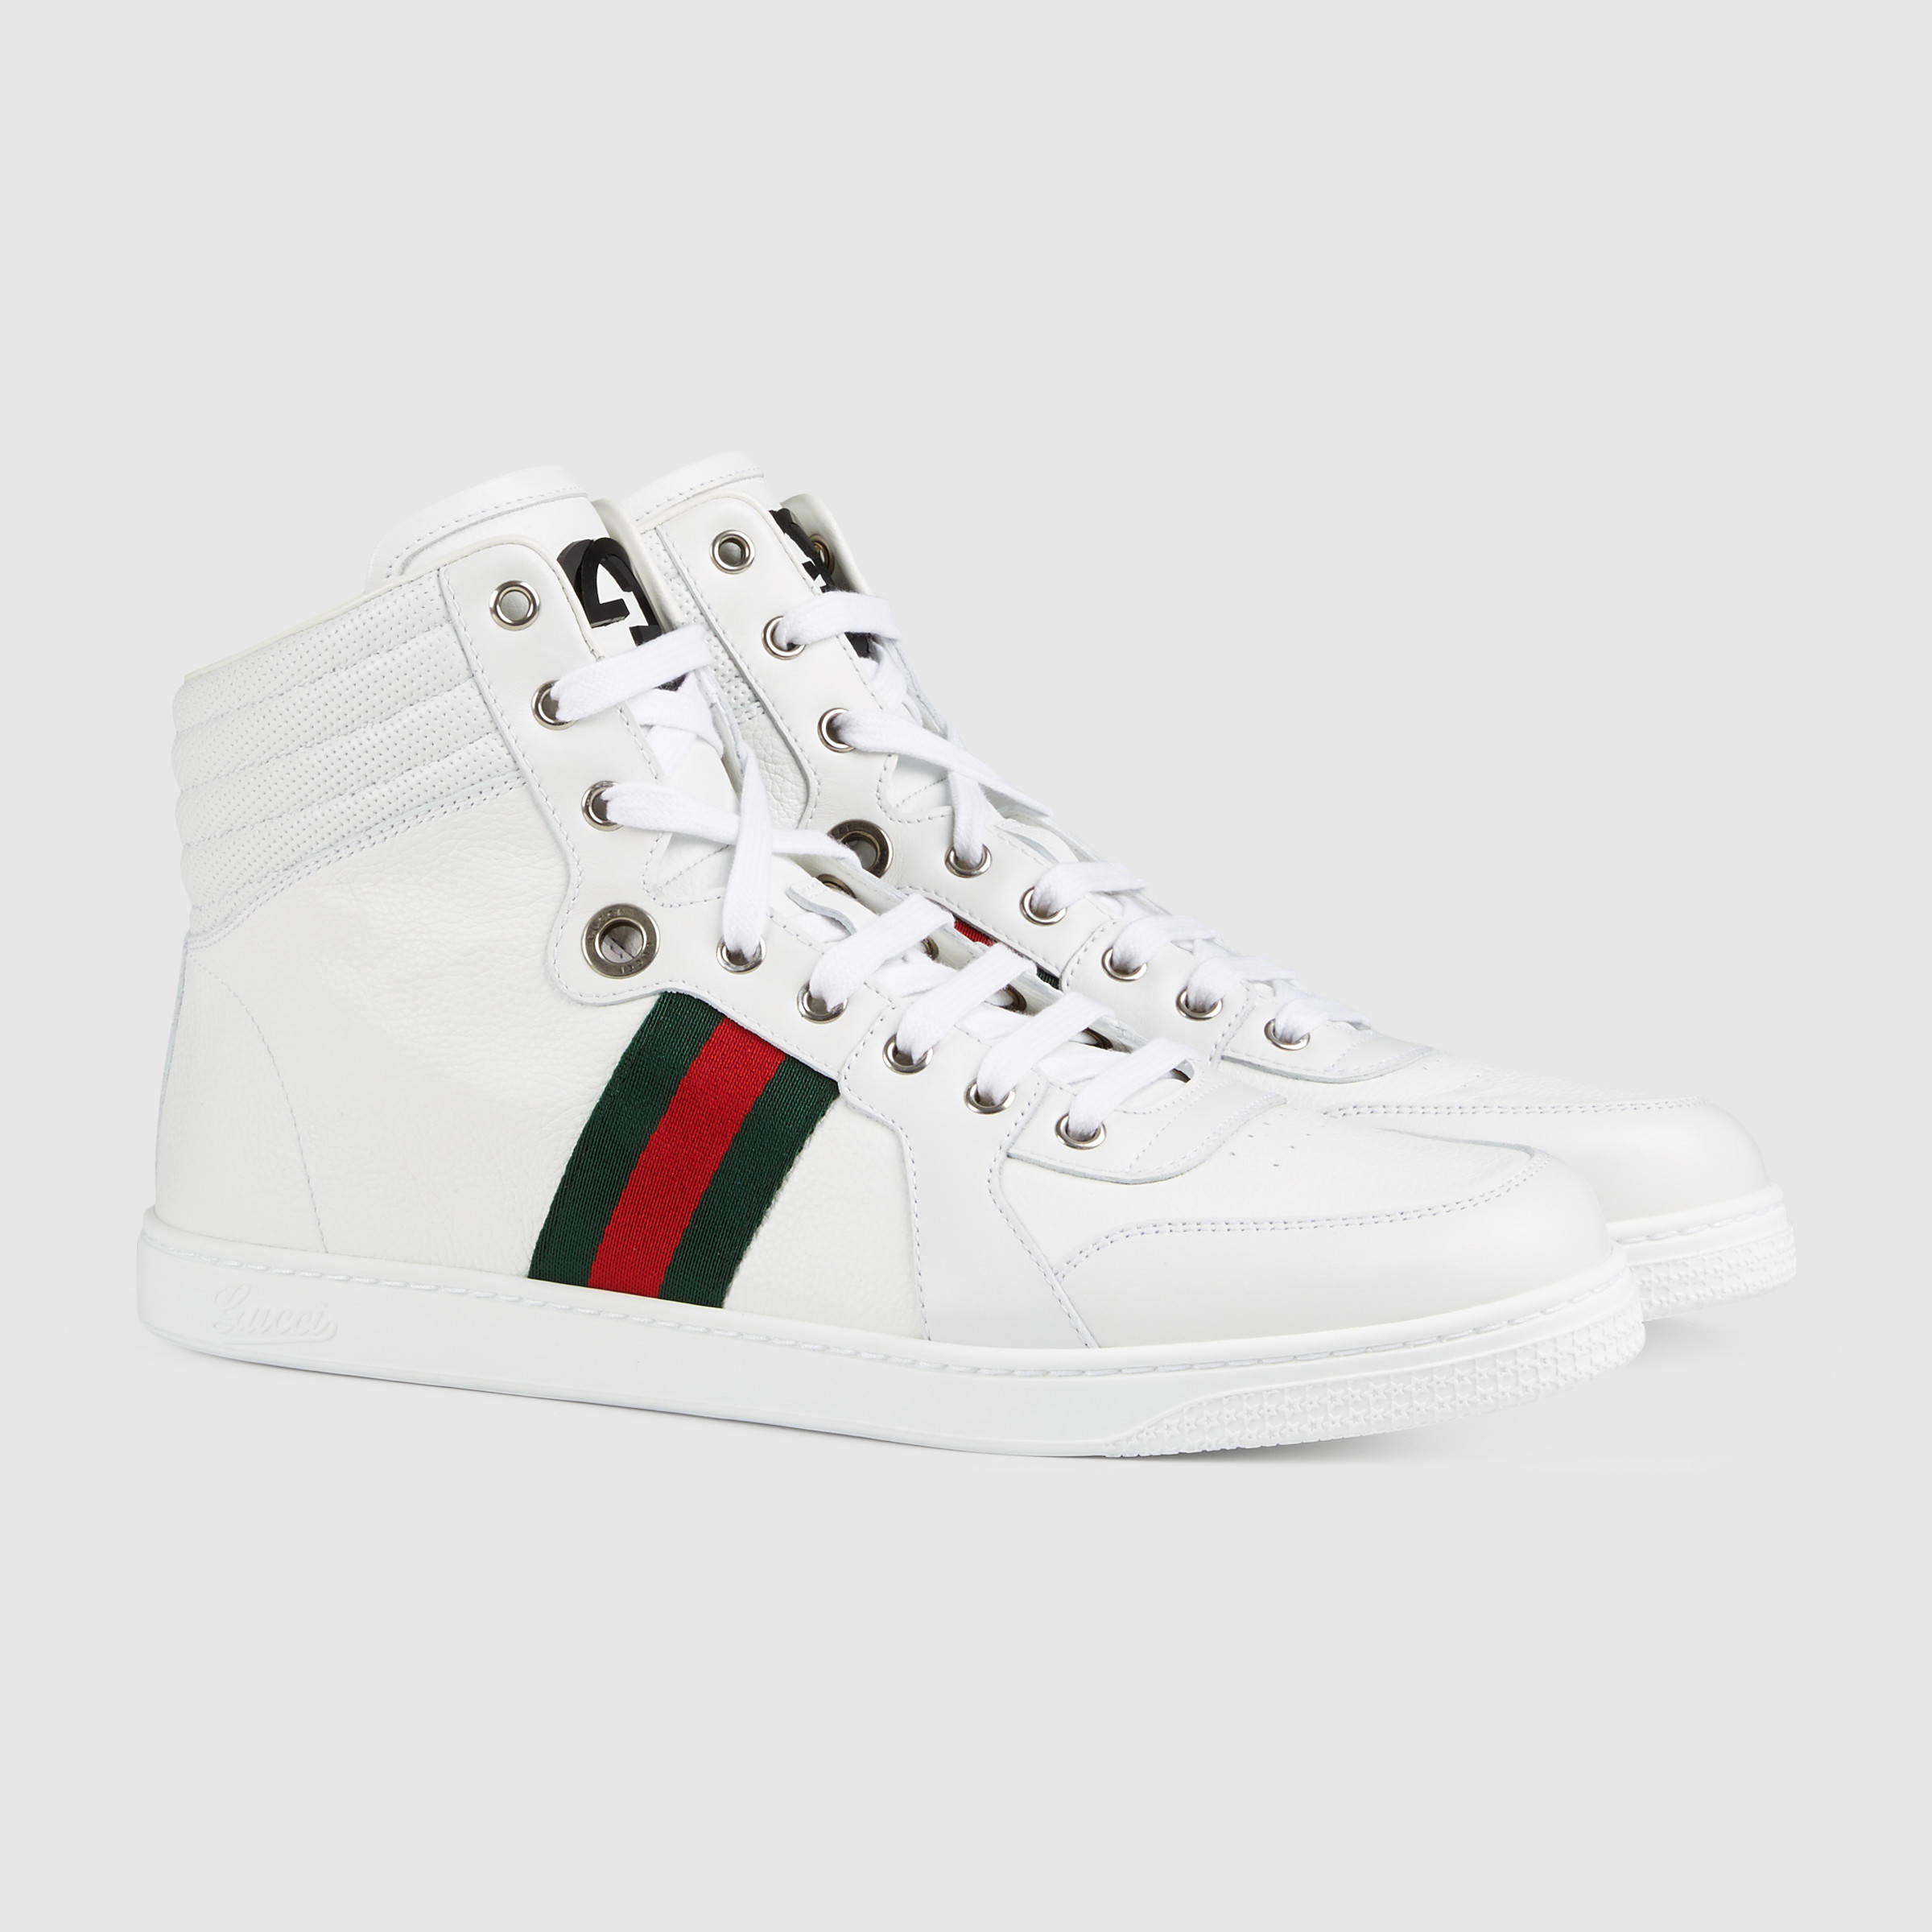 Lyst - Gucci Leather High-top Sneaker in White for Men